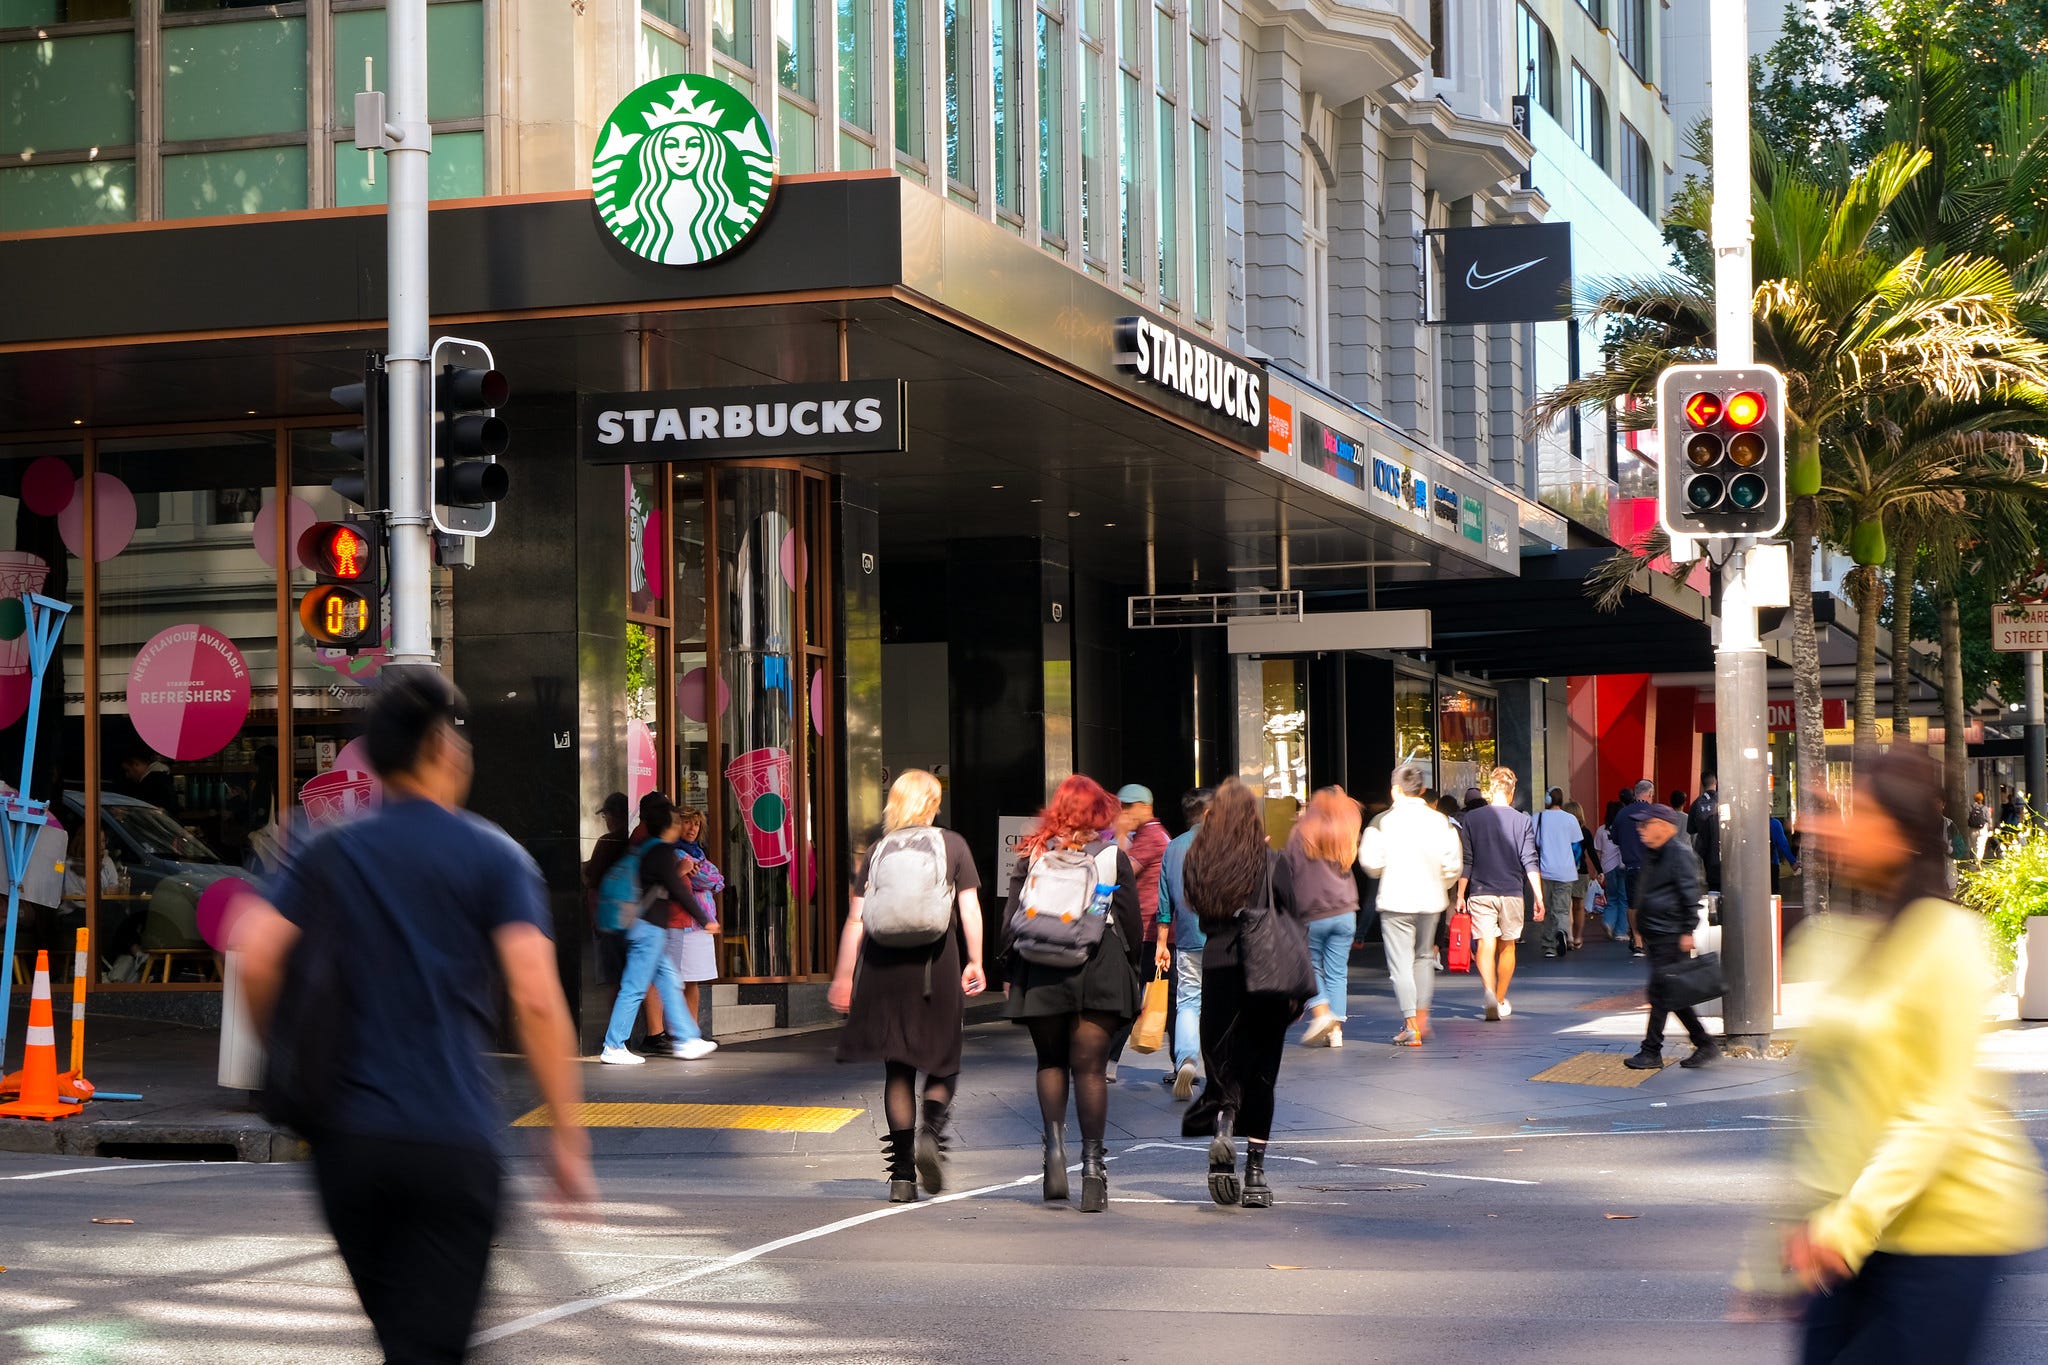 Starbucks revamps and expands after struggling to win over NZ